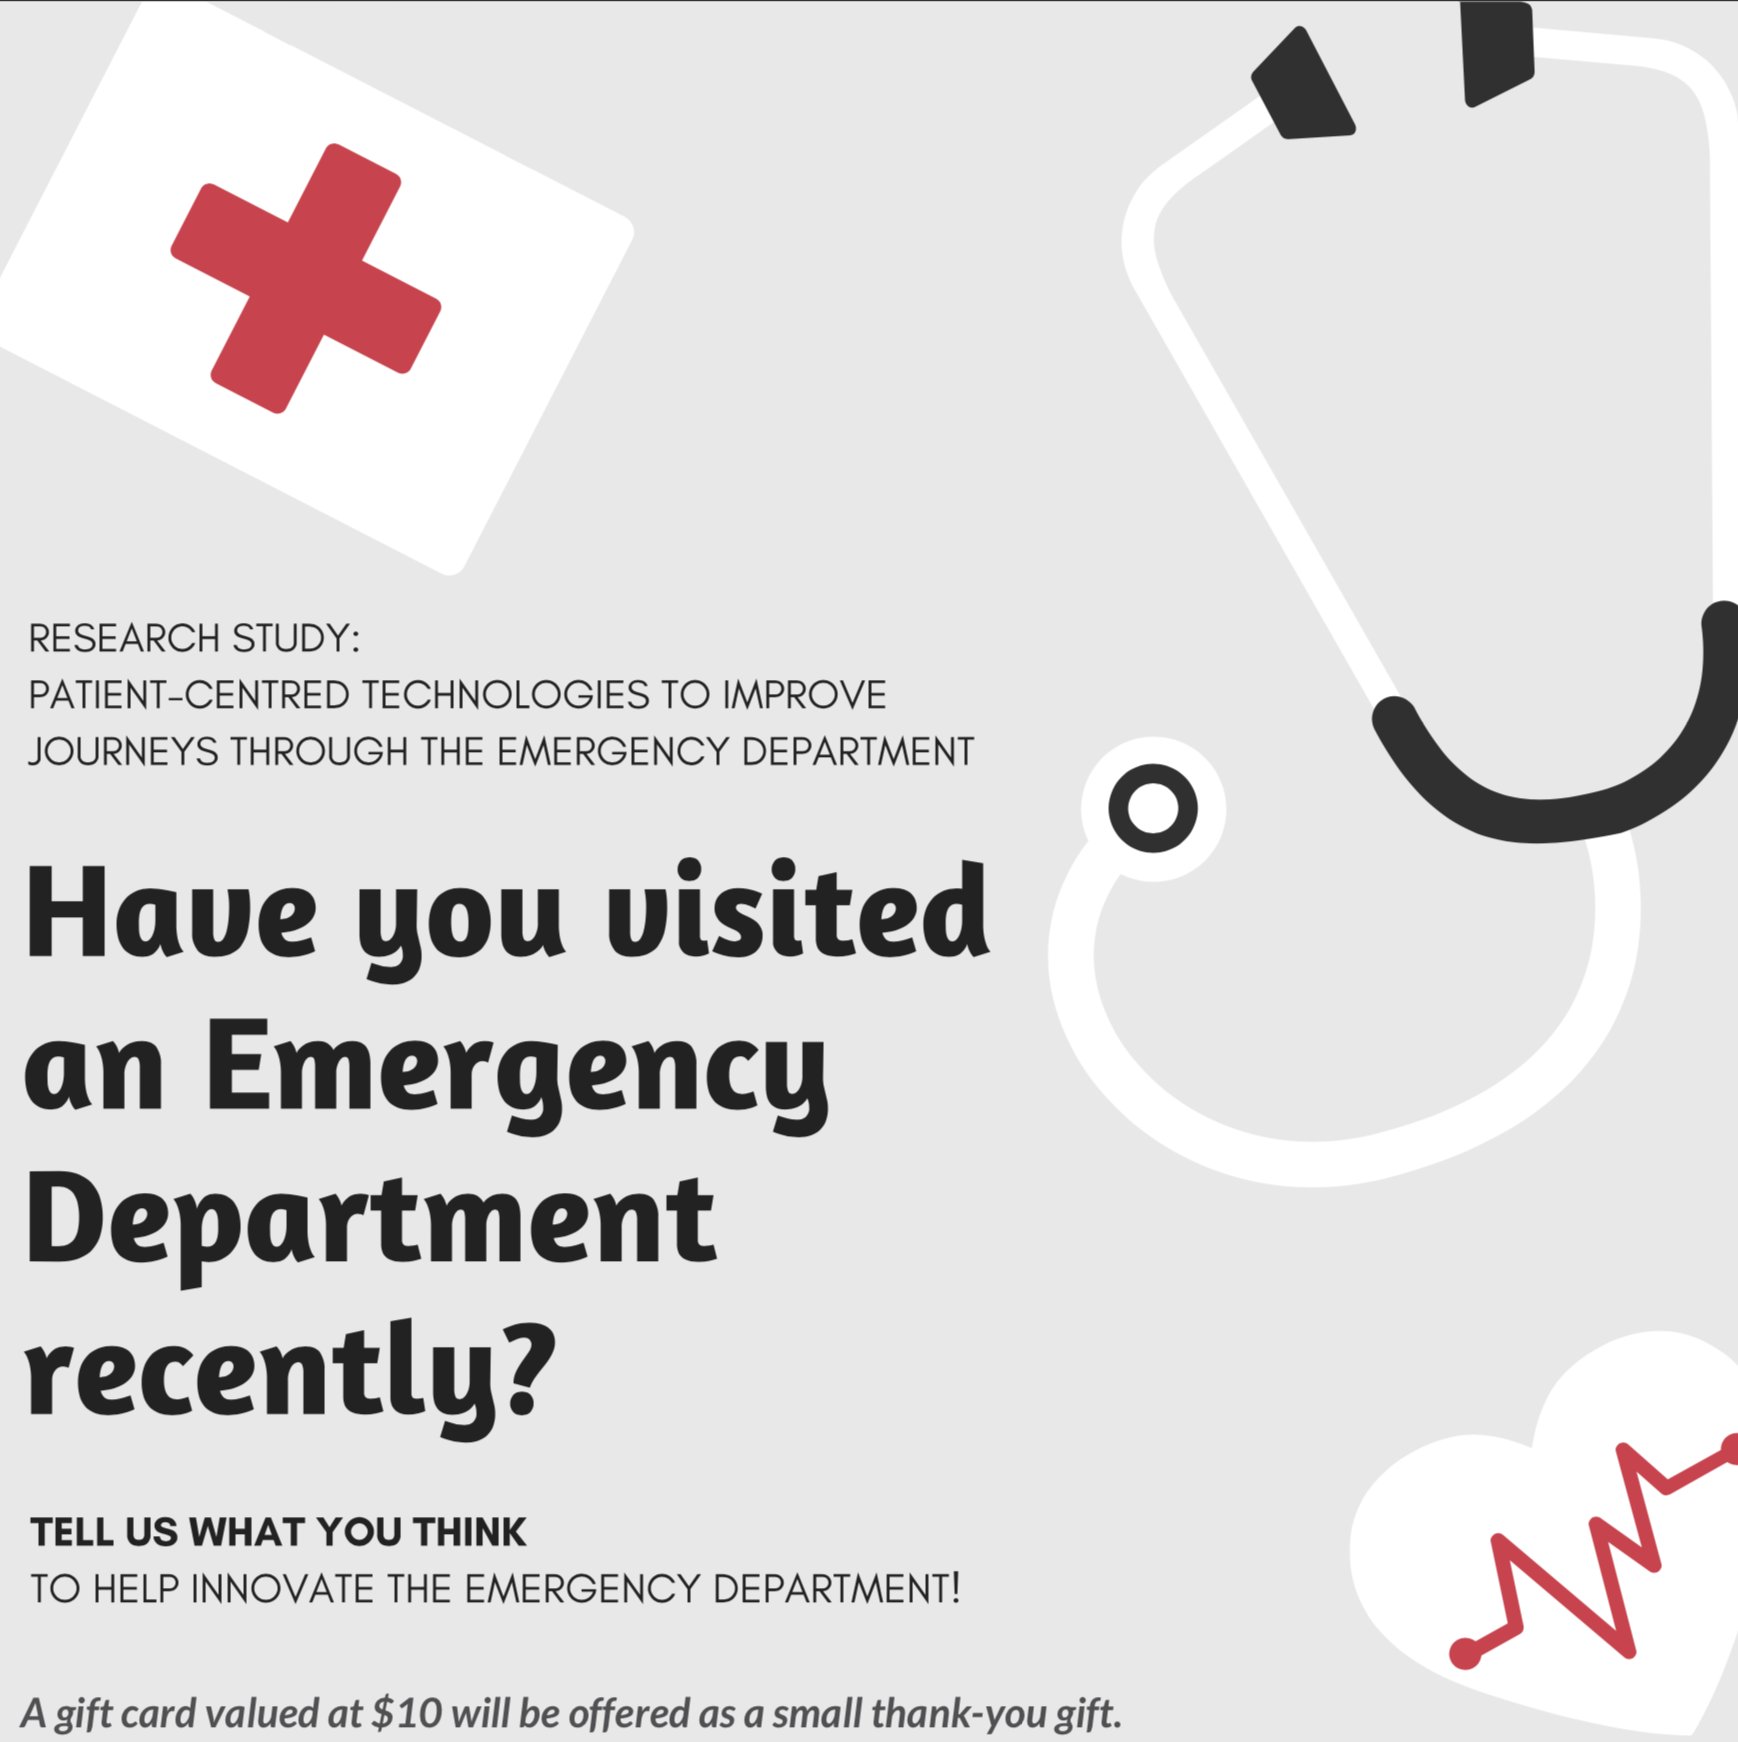 UBC digem on X: If you are over 19 years old and had a recent visit to an  emergency department, we invite you to participate in a research study that  aims to